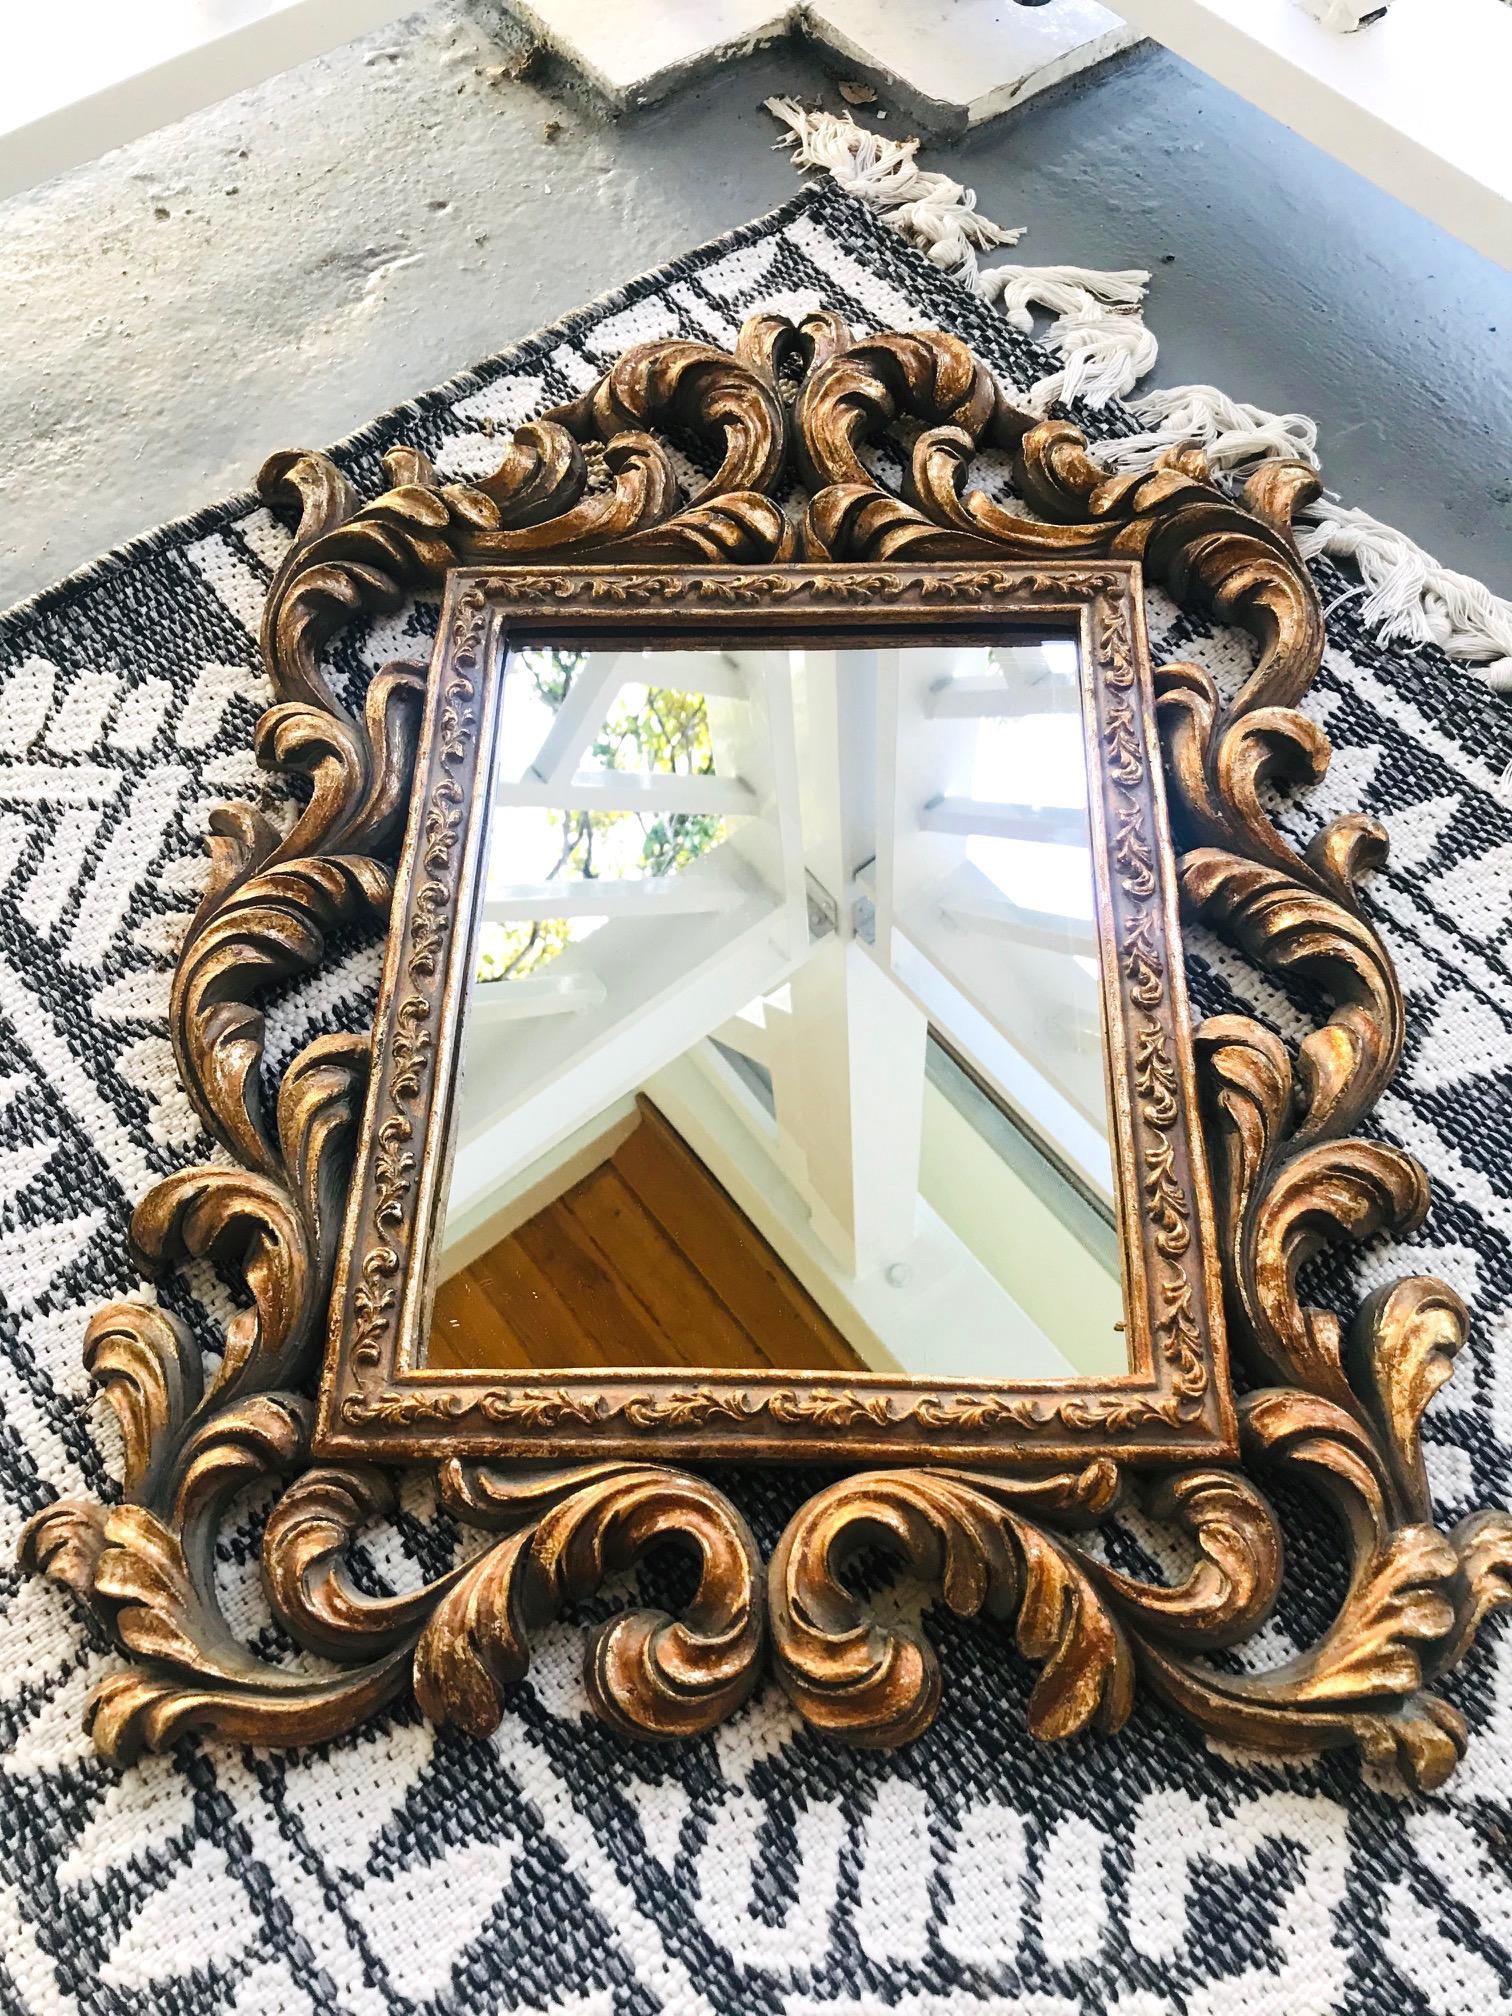 Hollywood Regency Baroque style mirror features a solid wood frame with hand carved designs and antique gold leaf finish. The ornamental frame features stylized scrolls of foliage and Prince of Wales plumes. The rectangular inner frame has a series